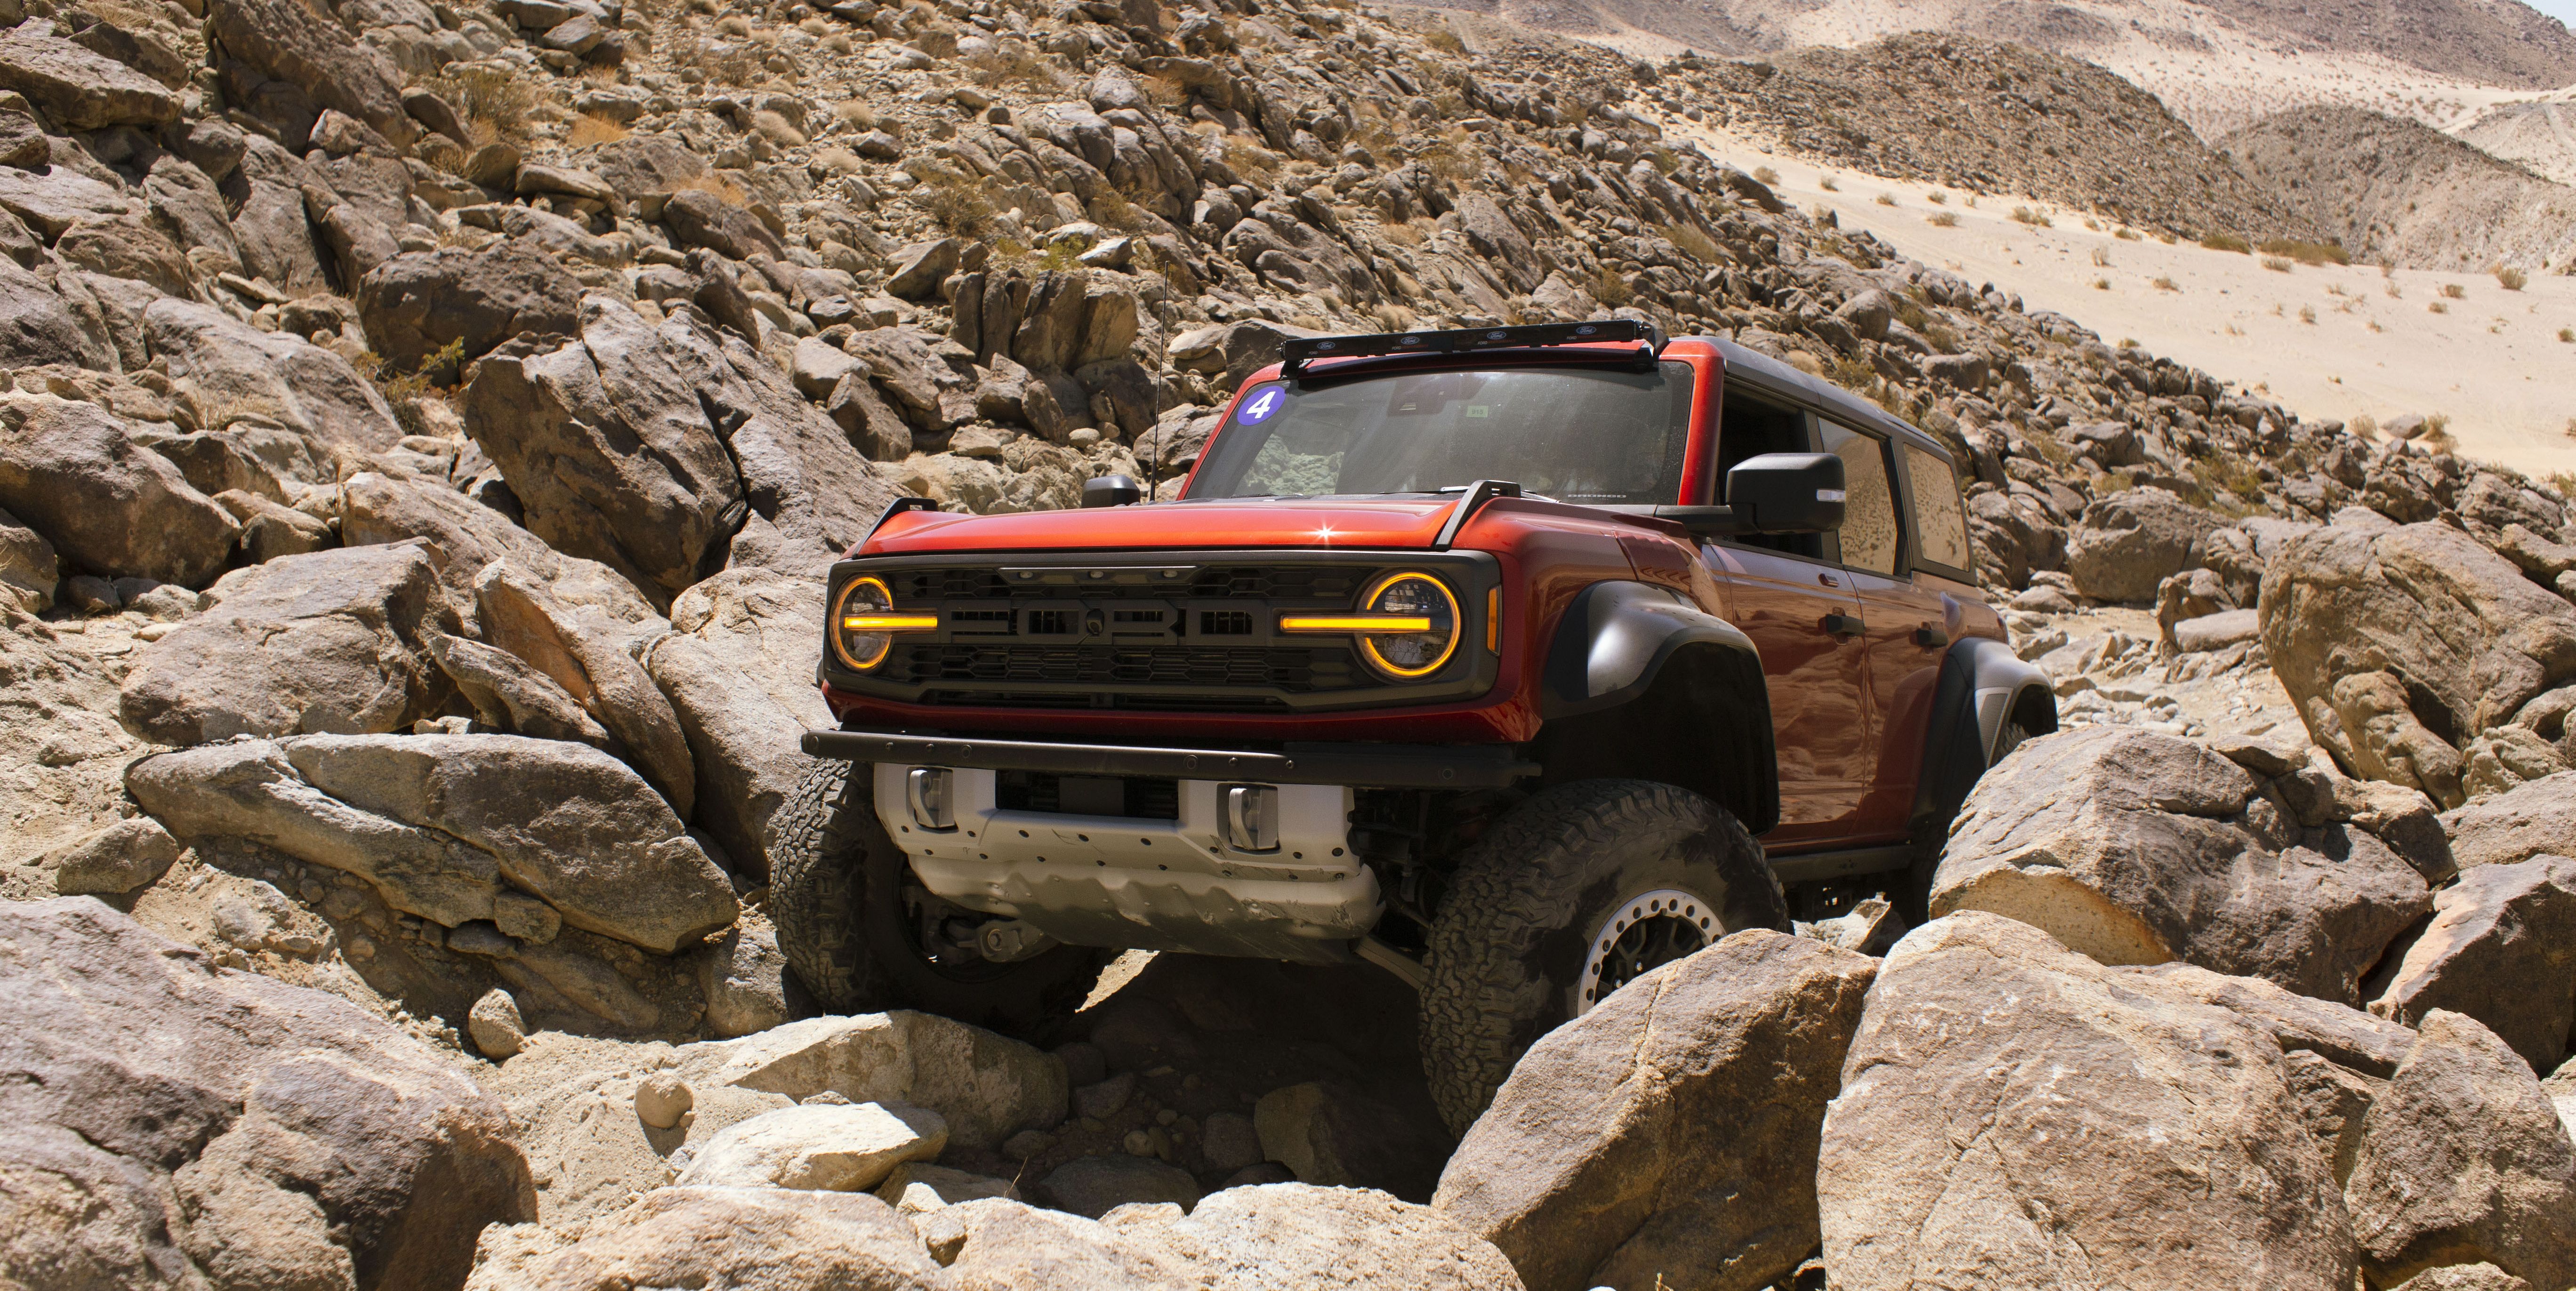 Nature Is Slow and the Braptor Is Fast: Desert-Running the 2022 Ford Bronco Raptor